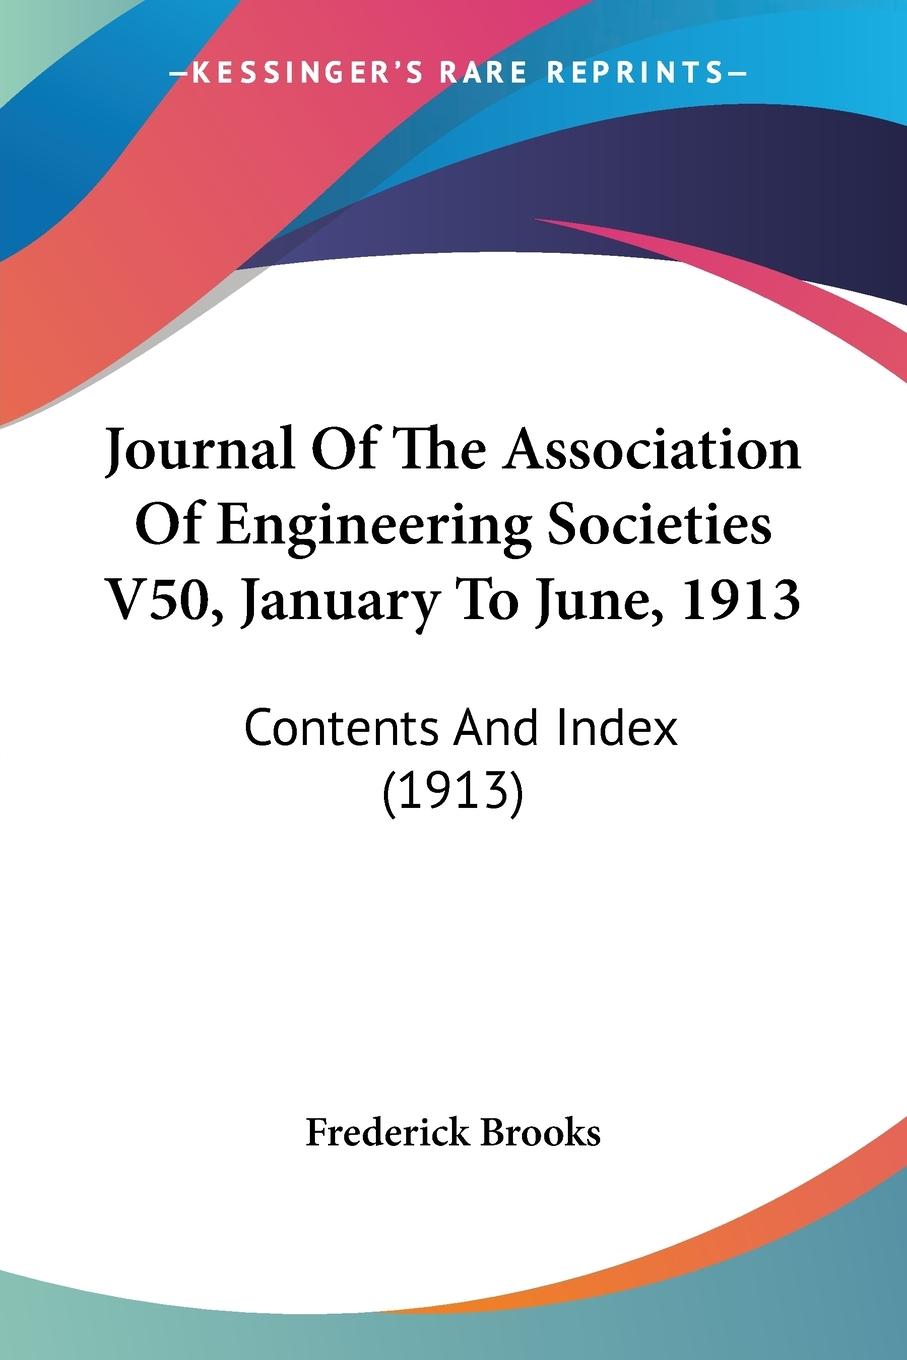 Journal Of The Association Of Engineering Societies V50, January To June, 1913 - Frederick Brooks